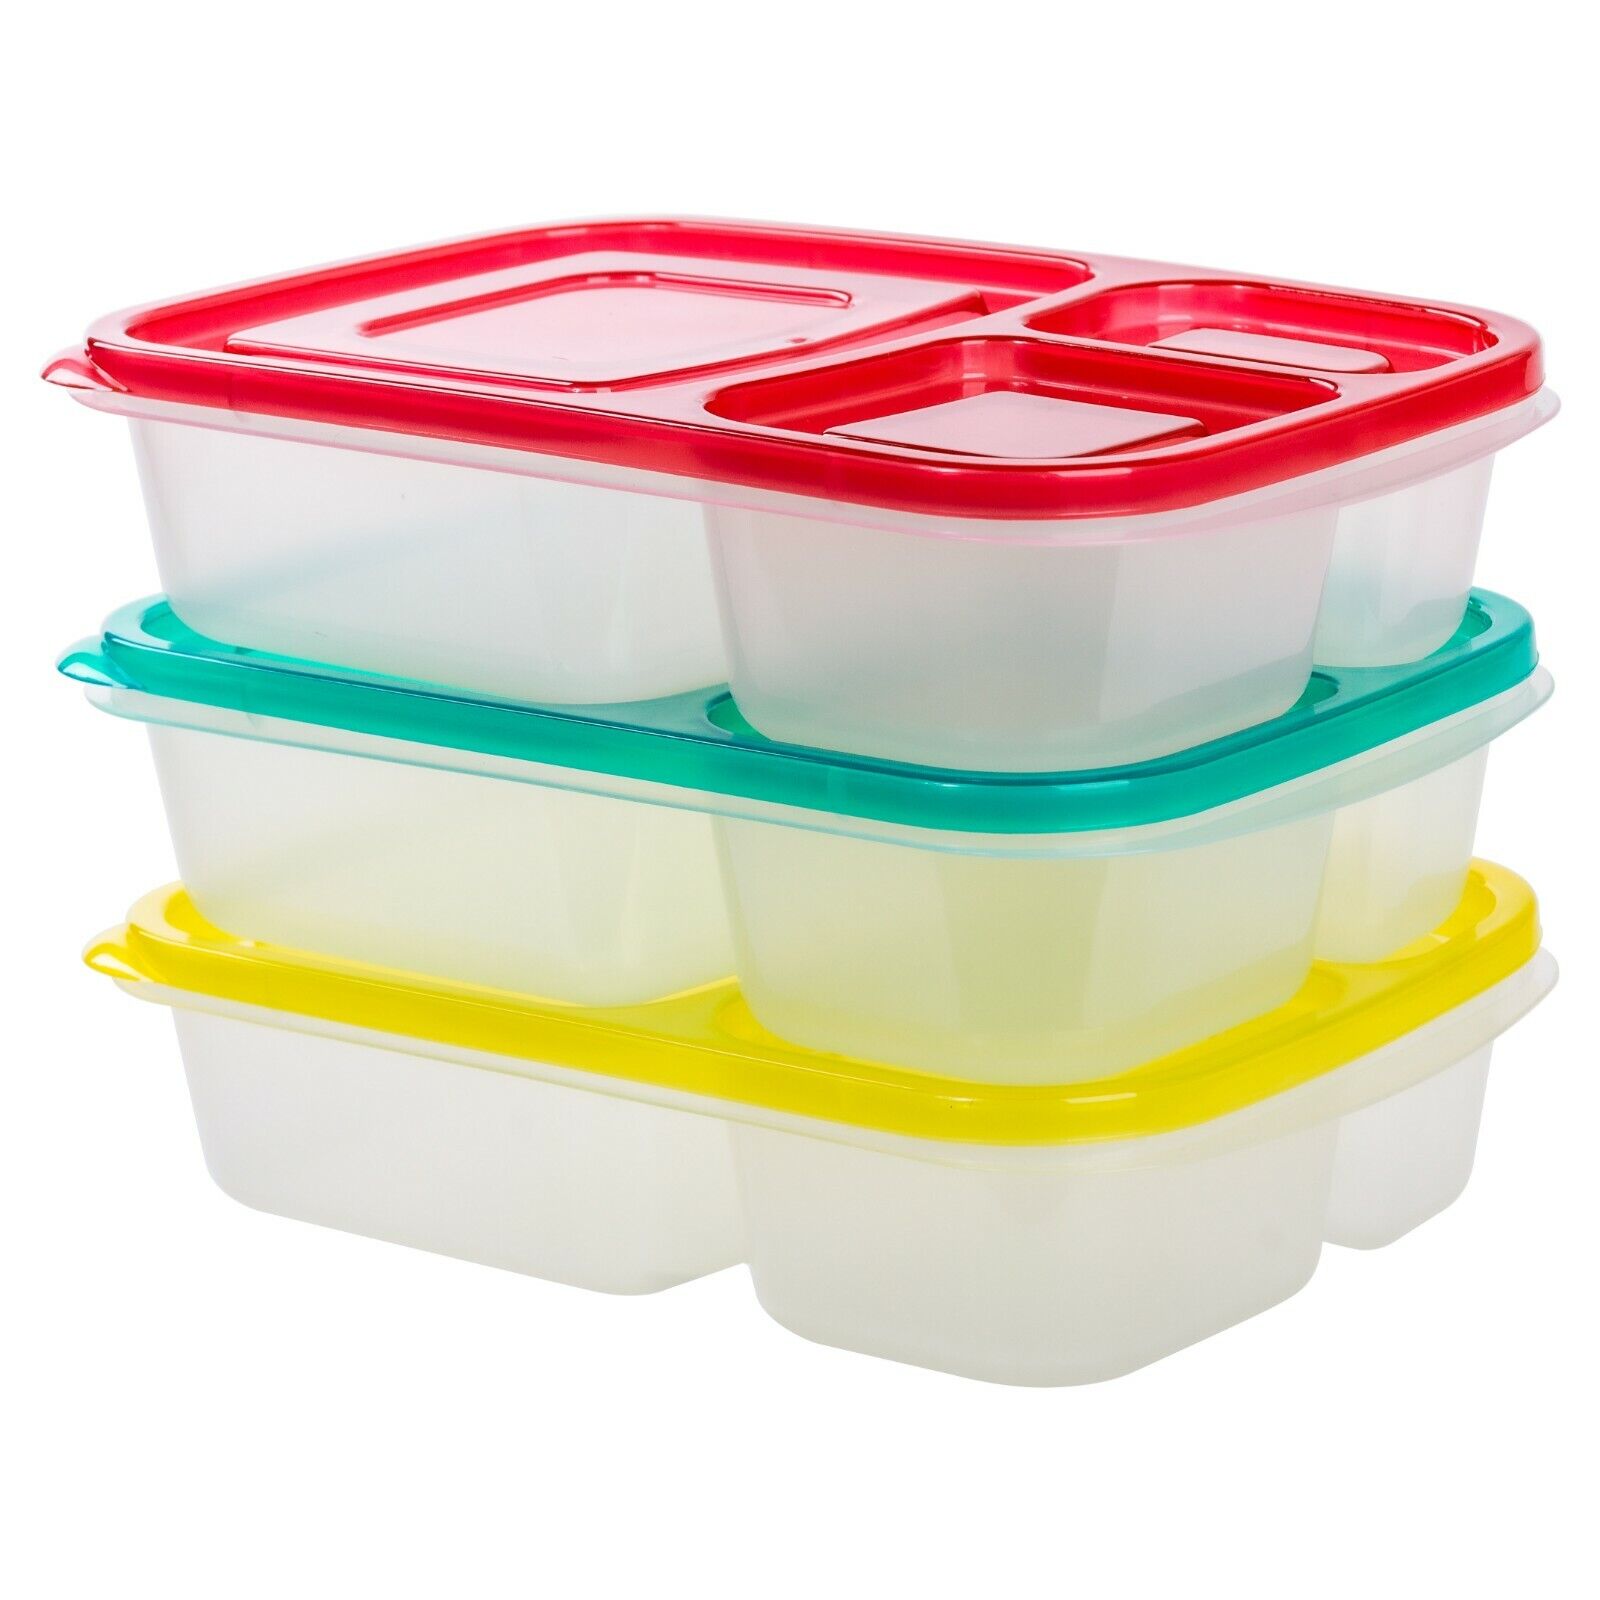 handbird 3 Food Storage 3 Compartment Plastic Reusable Microwavable Meal  Prep Containers